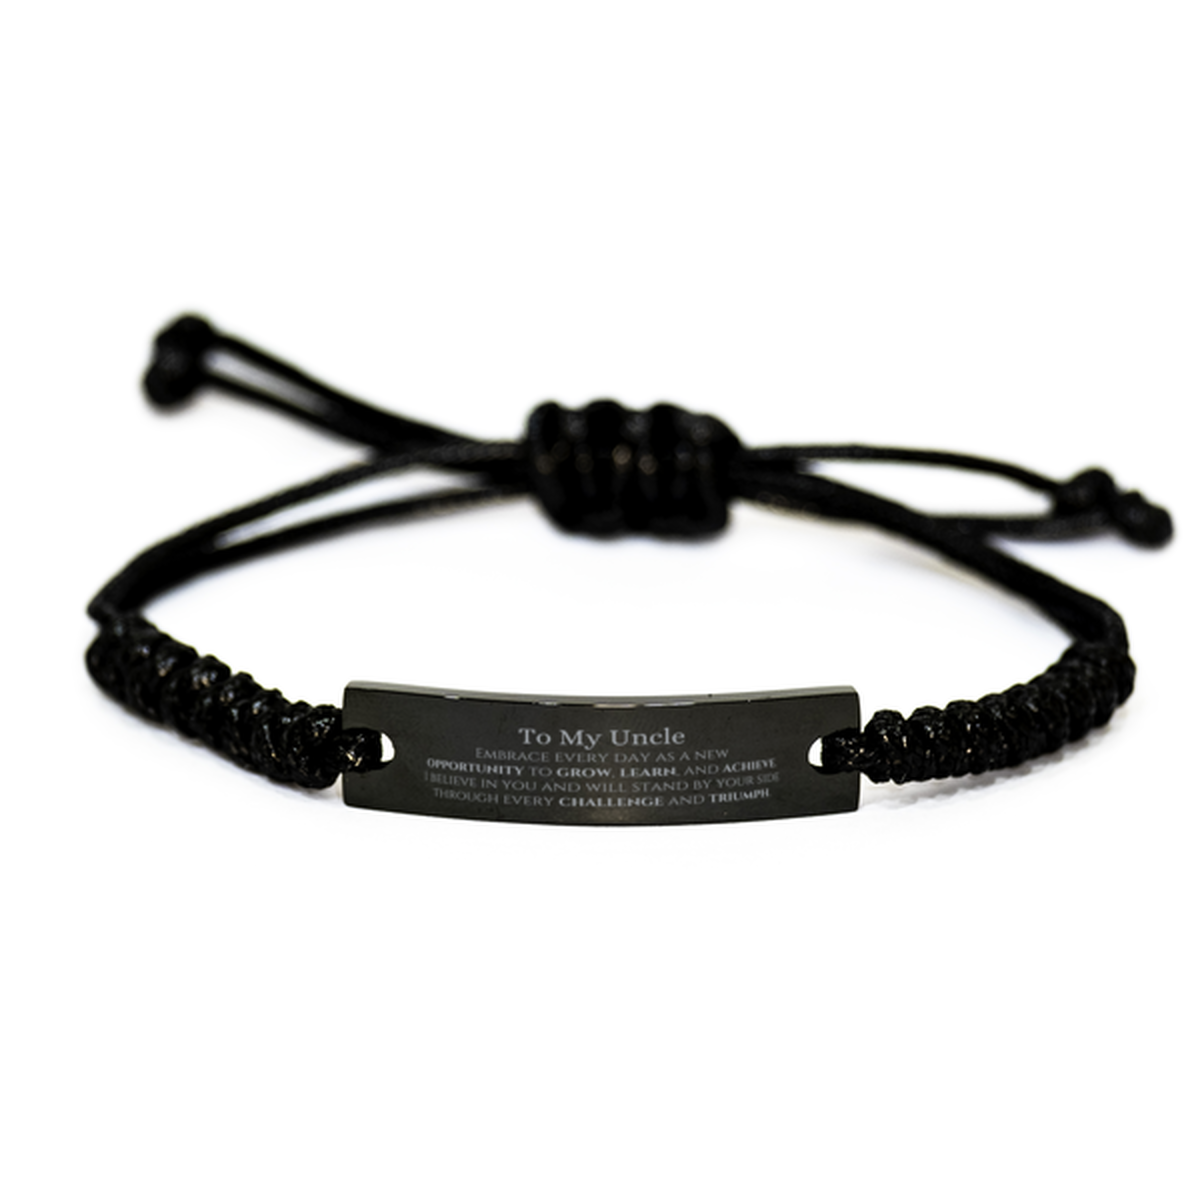 To My Uncle Gifts, I believe in you and will stand by your side, Inspirational Black Rope Bracelet For Uncle, Birthday Christmas Motivational Uncle Gifts